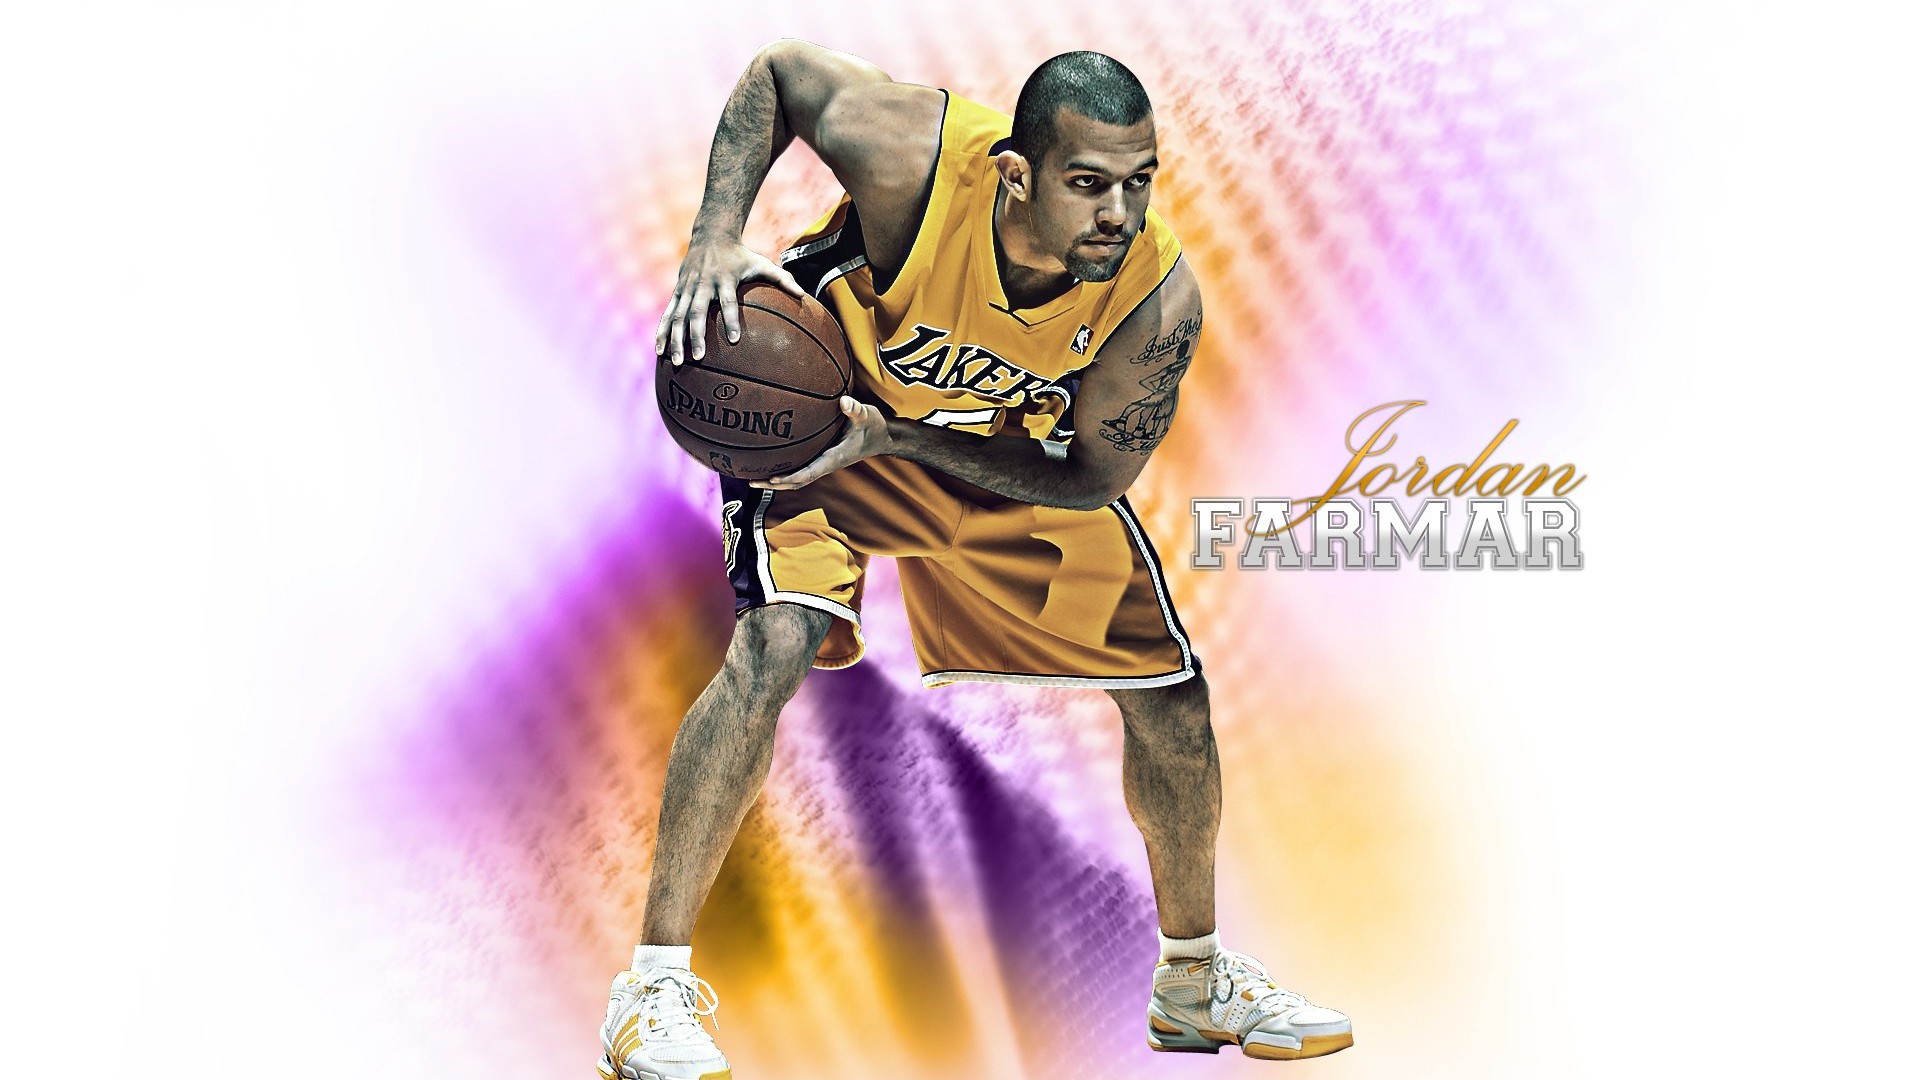 Los Angeles Lakers Wallpaper Oficial #11 - 1920x1080